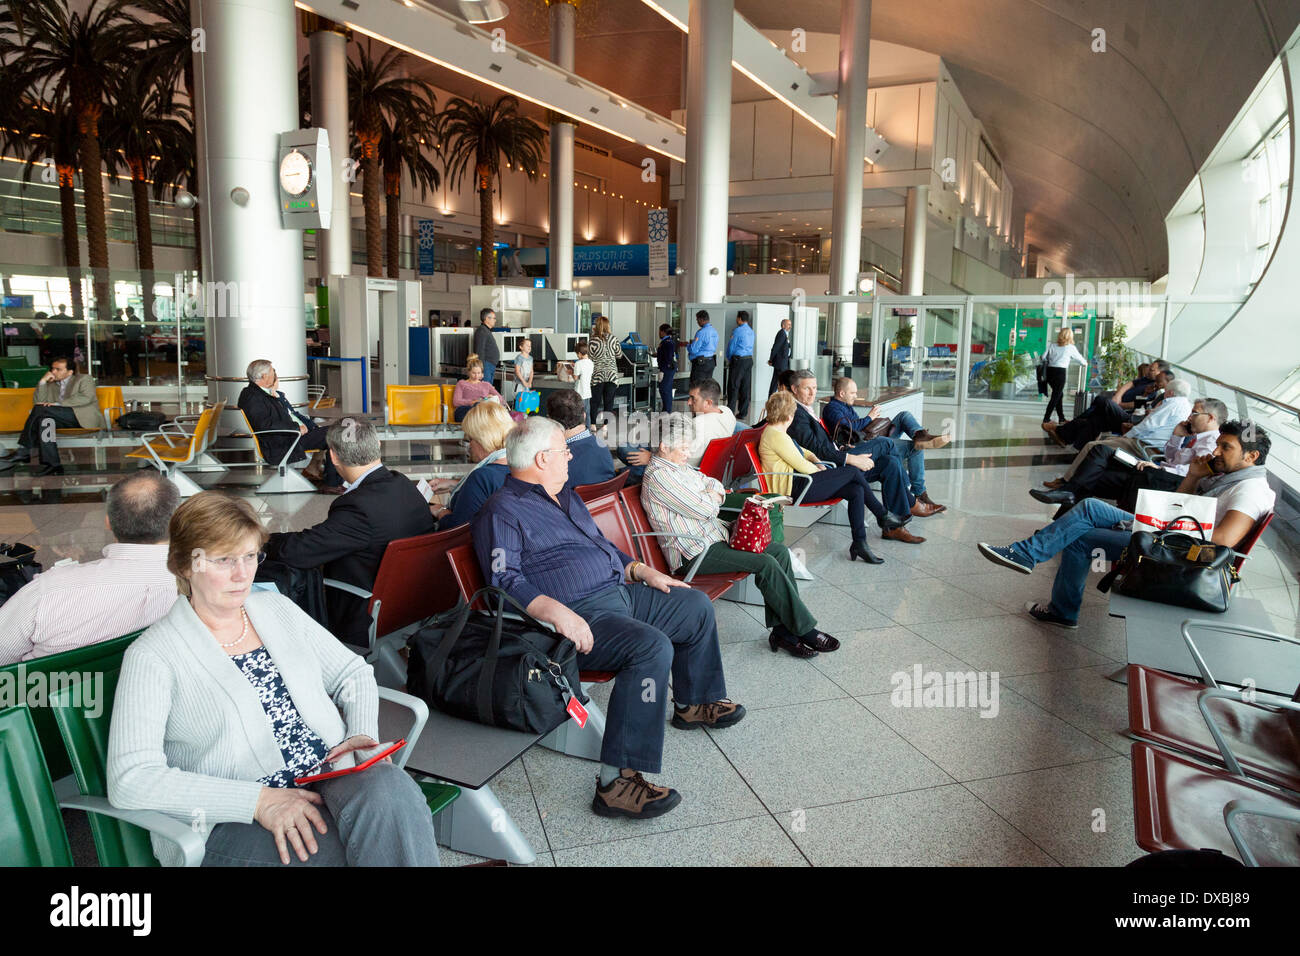 Air passengers waiting for their flight at the gate, Dubai International airport terminal, UAE, United Arab Emirates Middle East Stock Photo